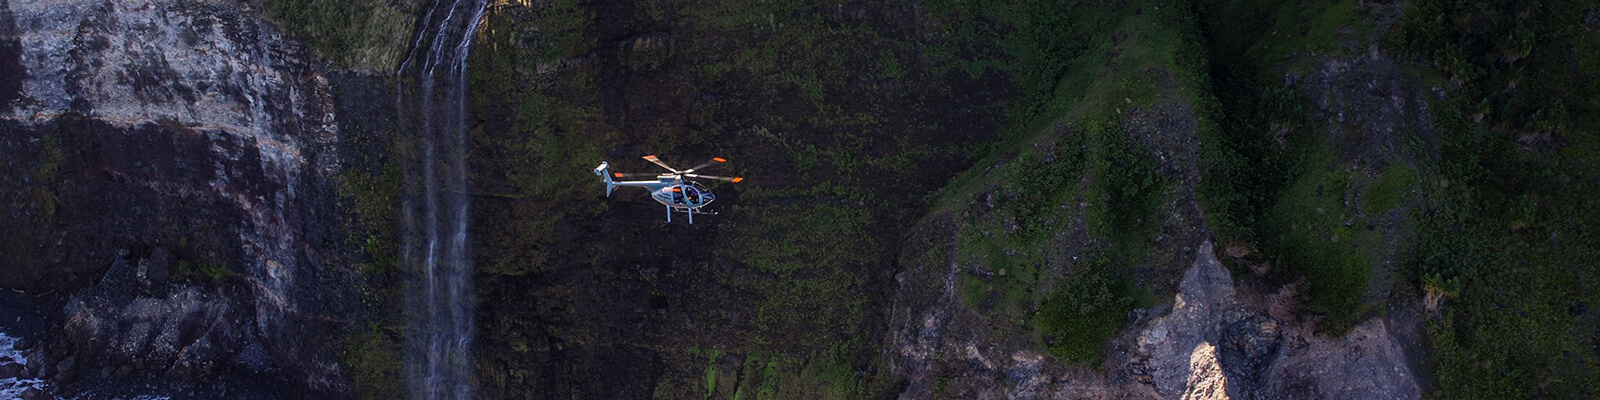 Paradise Helicopters Volcano Waterfall Flight Coupons